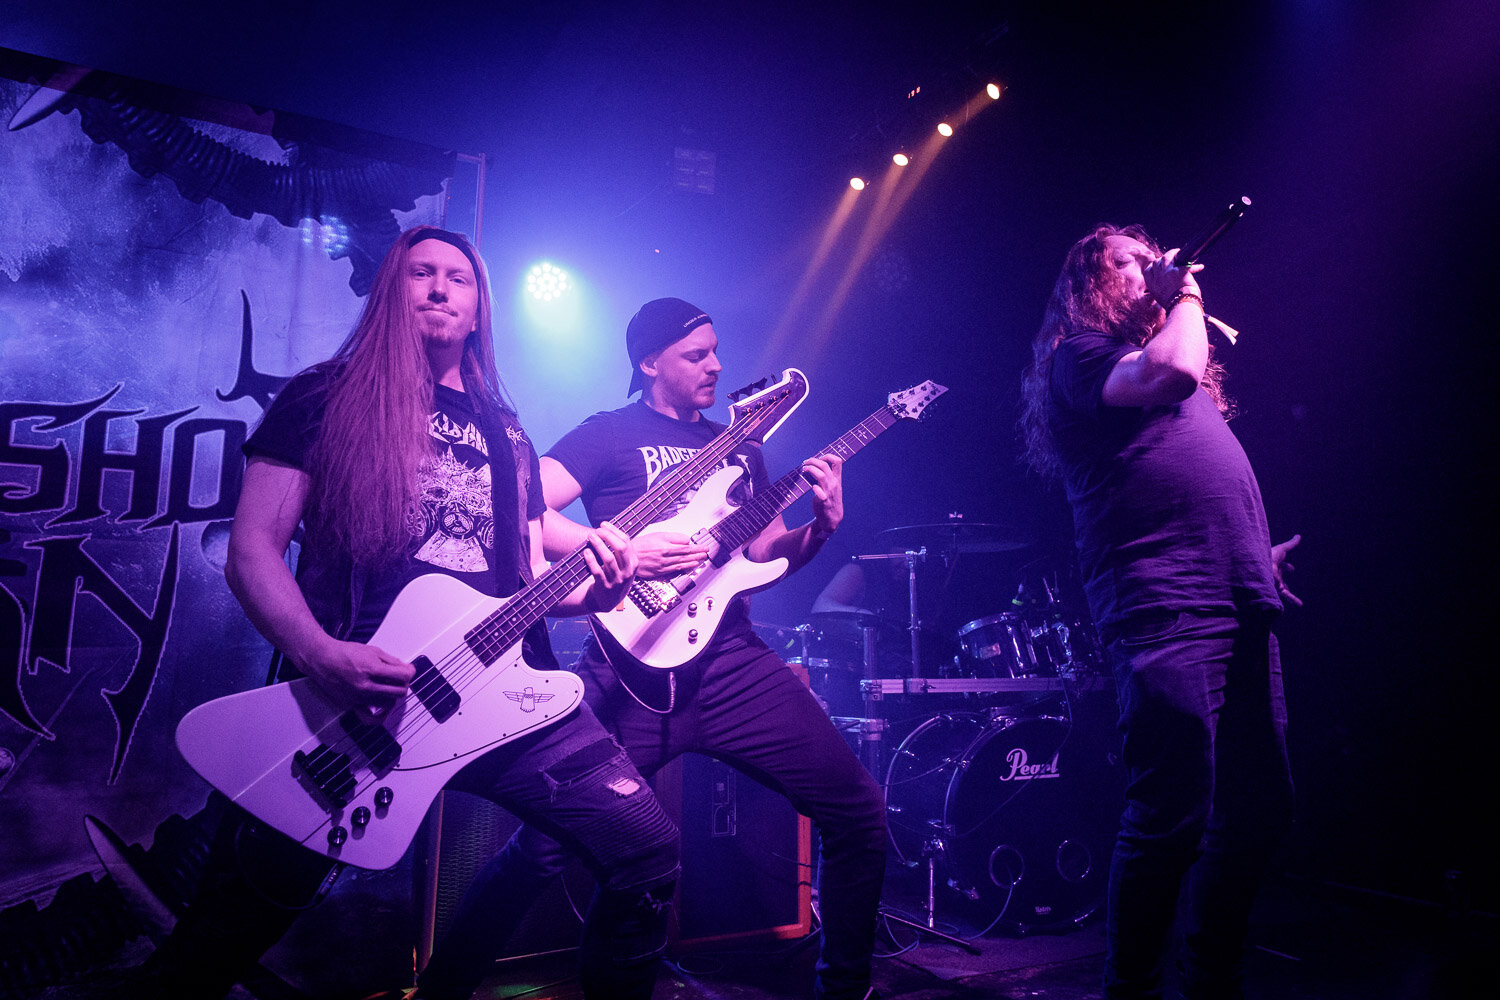 Frozen In Shadows at Rebellion in Manchester on February 16th 2020